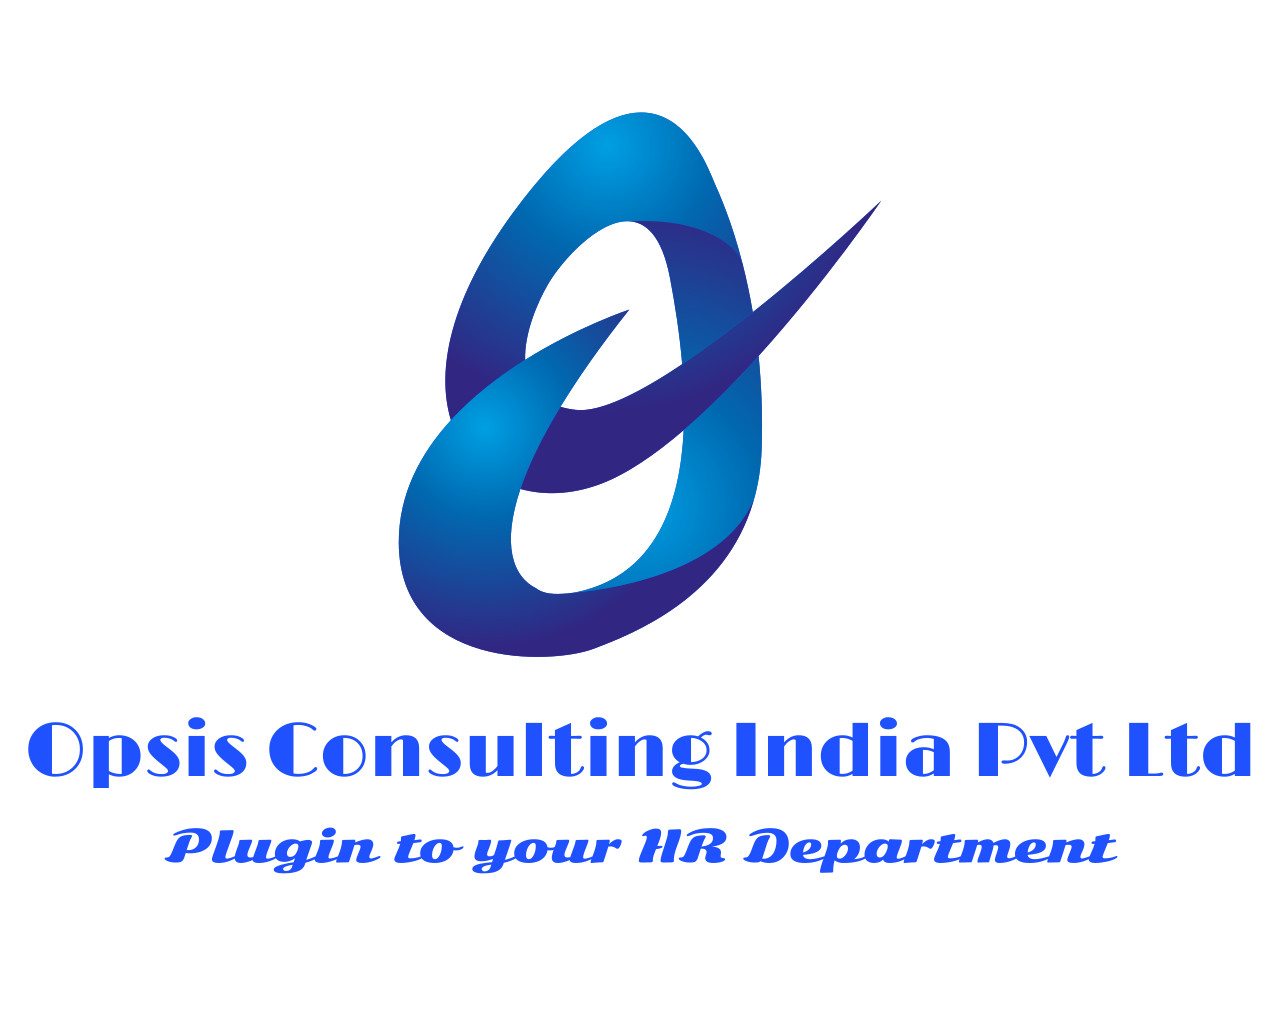 Opsis Consulting India